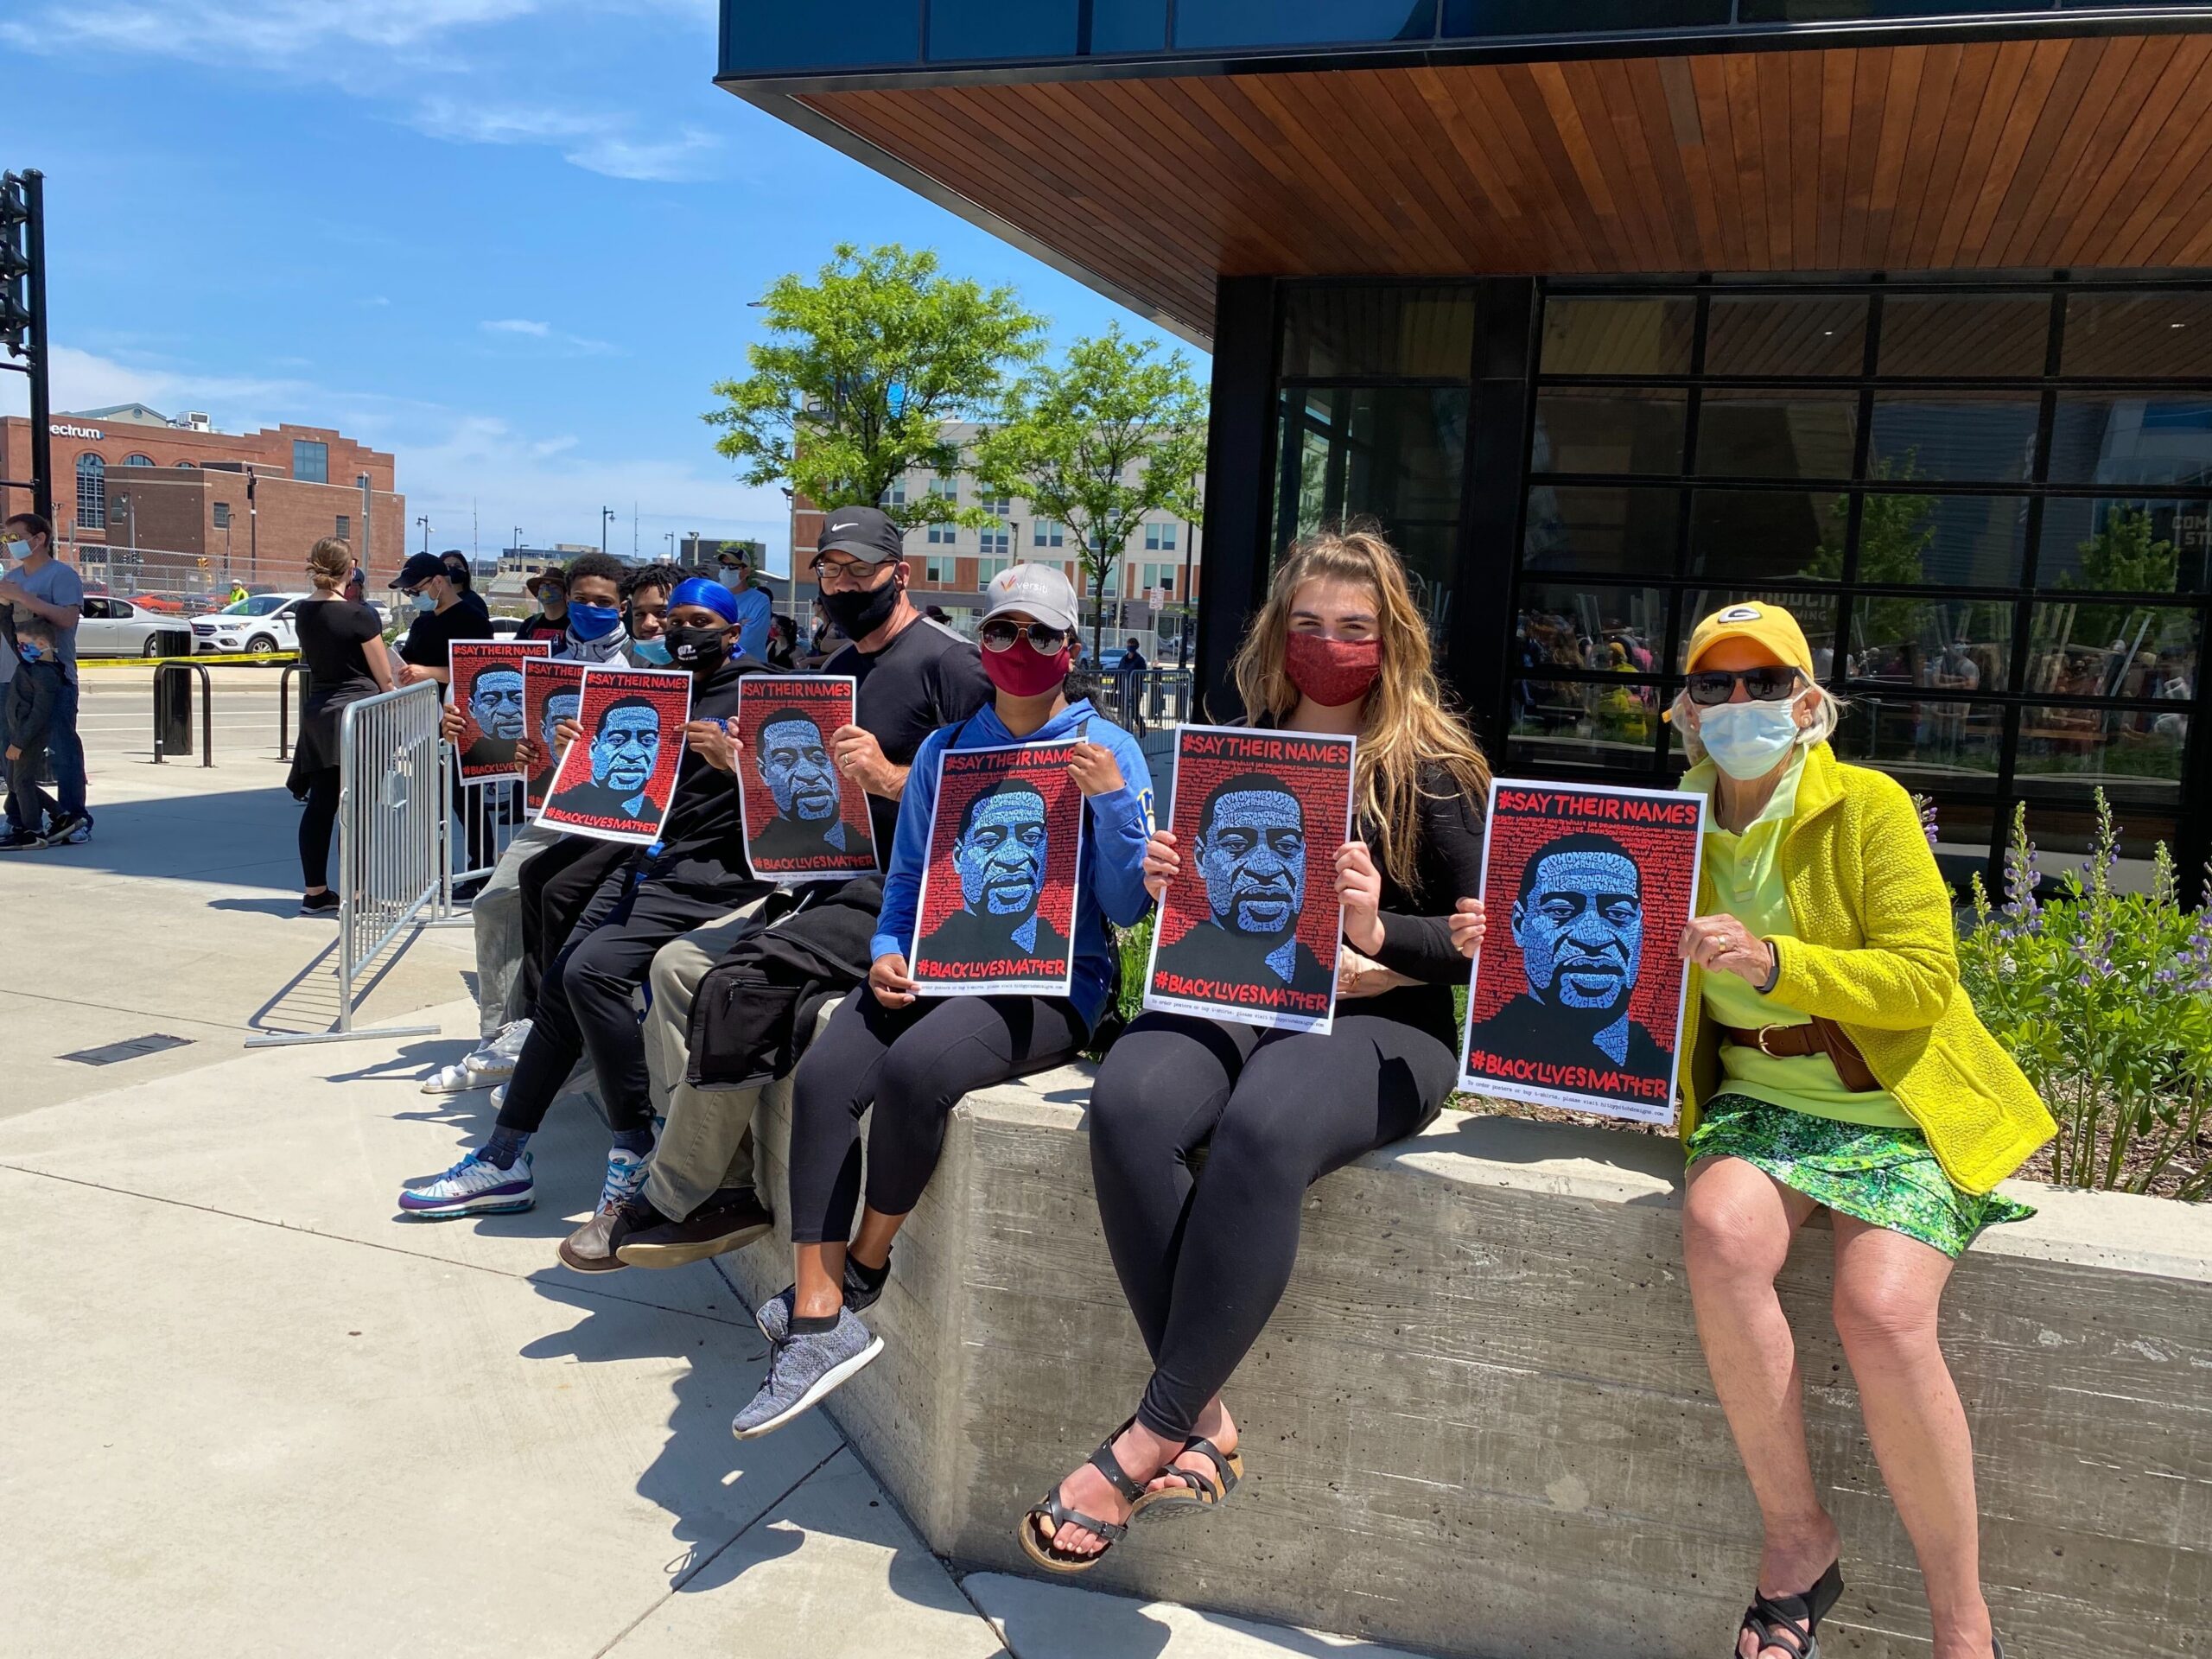 Protesters wait before Milwaukee Bucks protest at the Fiserv Forum in Milwaukee on Sunday afternoon, June 7, 2020